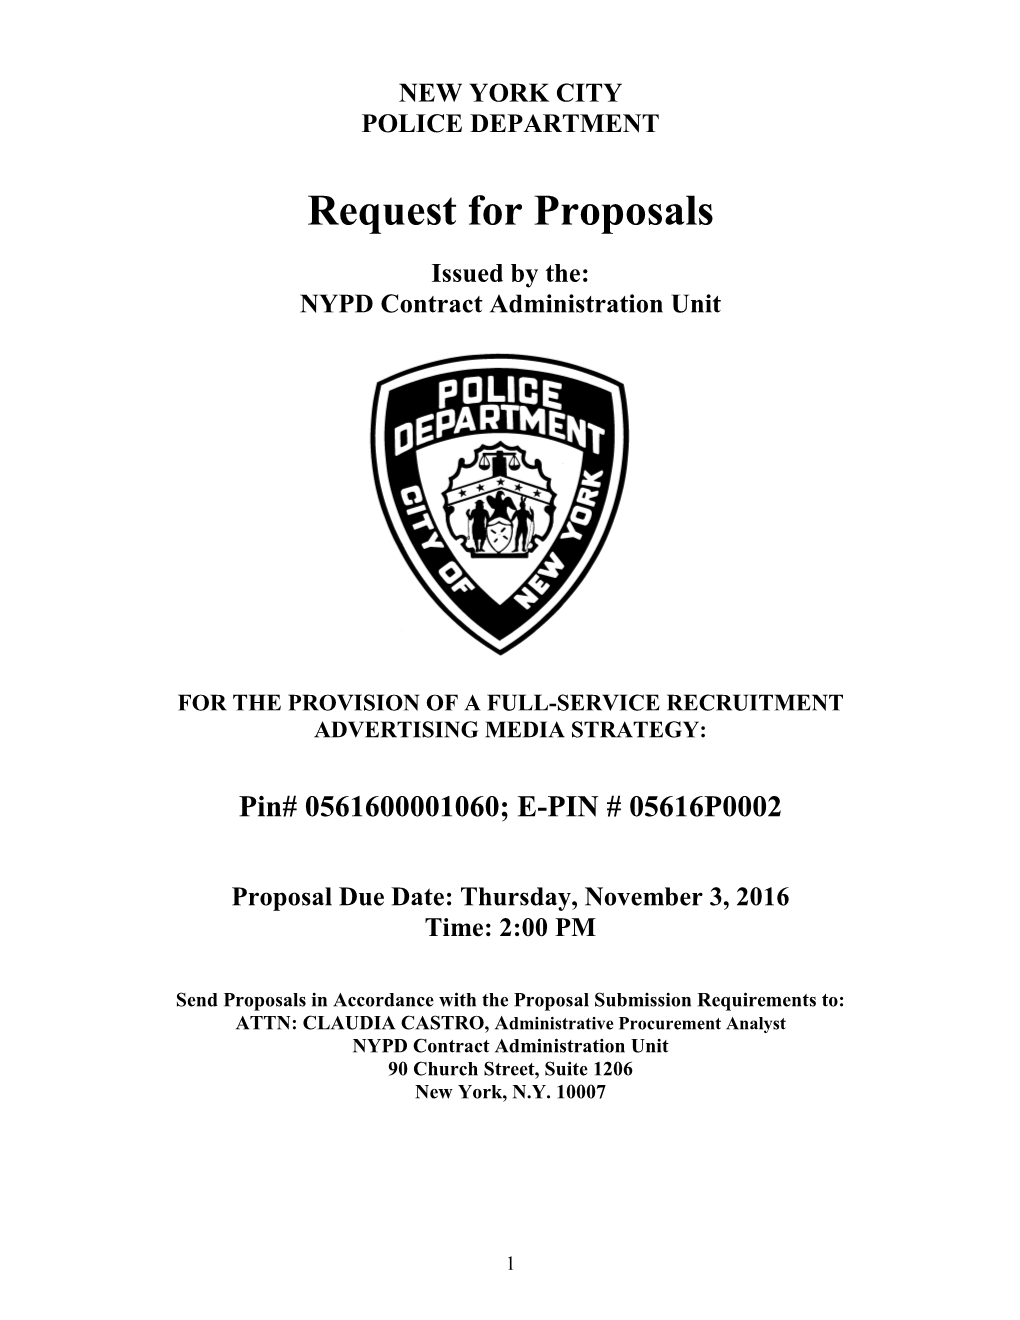 The City of New York Police Department Request for Proposals for Recruitment Advertising Media Strategy Services Pin: 0561600001060; E-Pin: 05616P0002